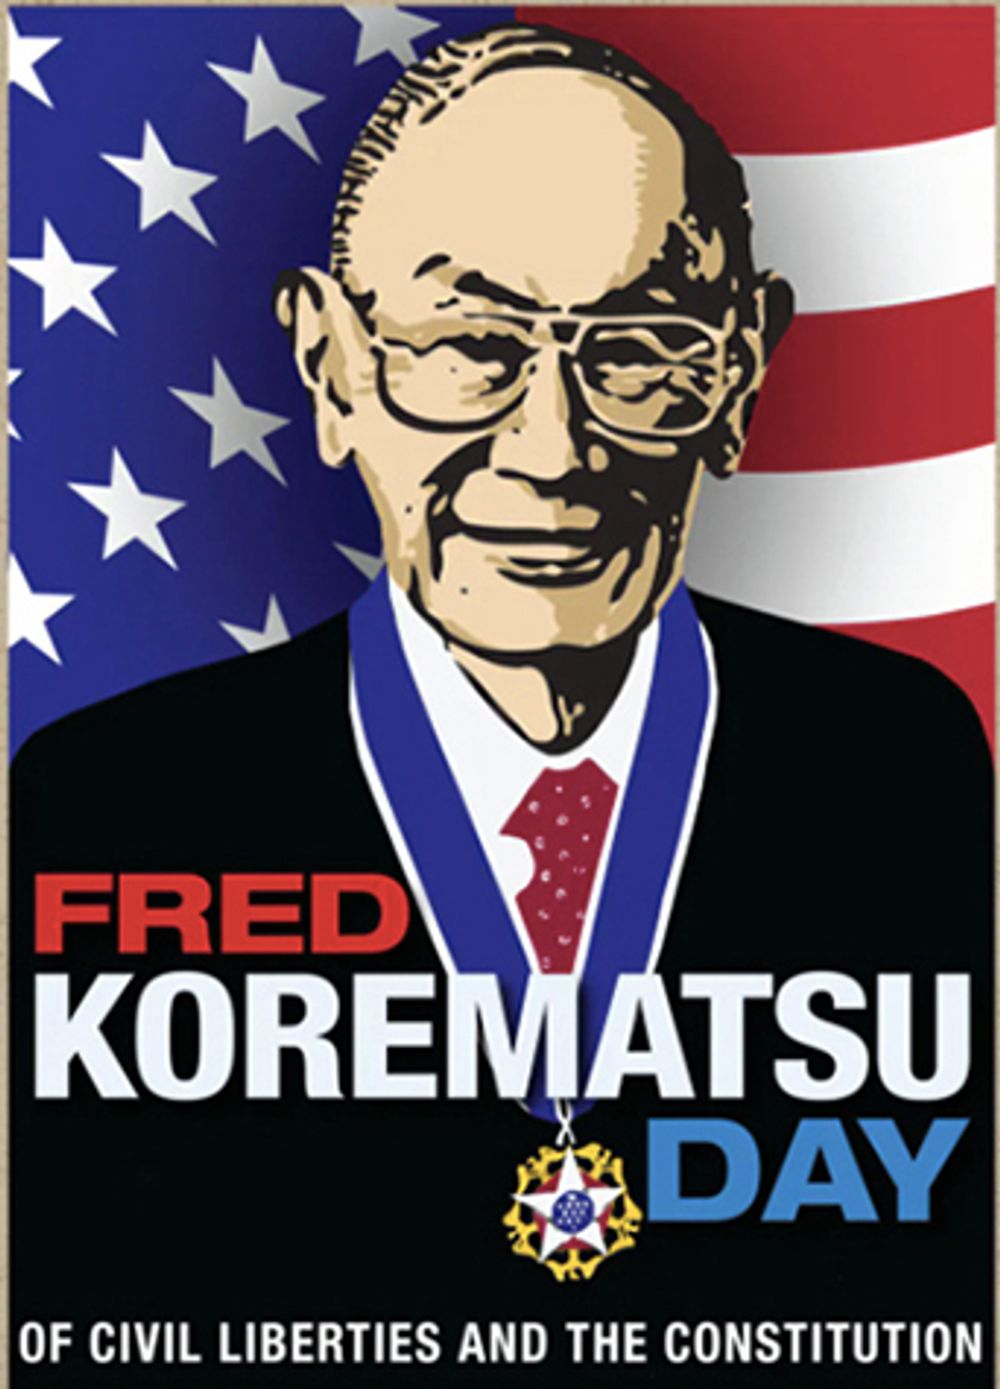 Image for Emil Guillermo: Remembering Fred T. Korematsu and a 6-3 Supreme Court from a different time